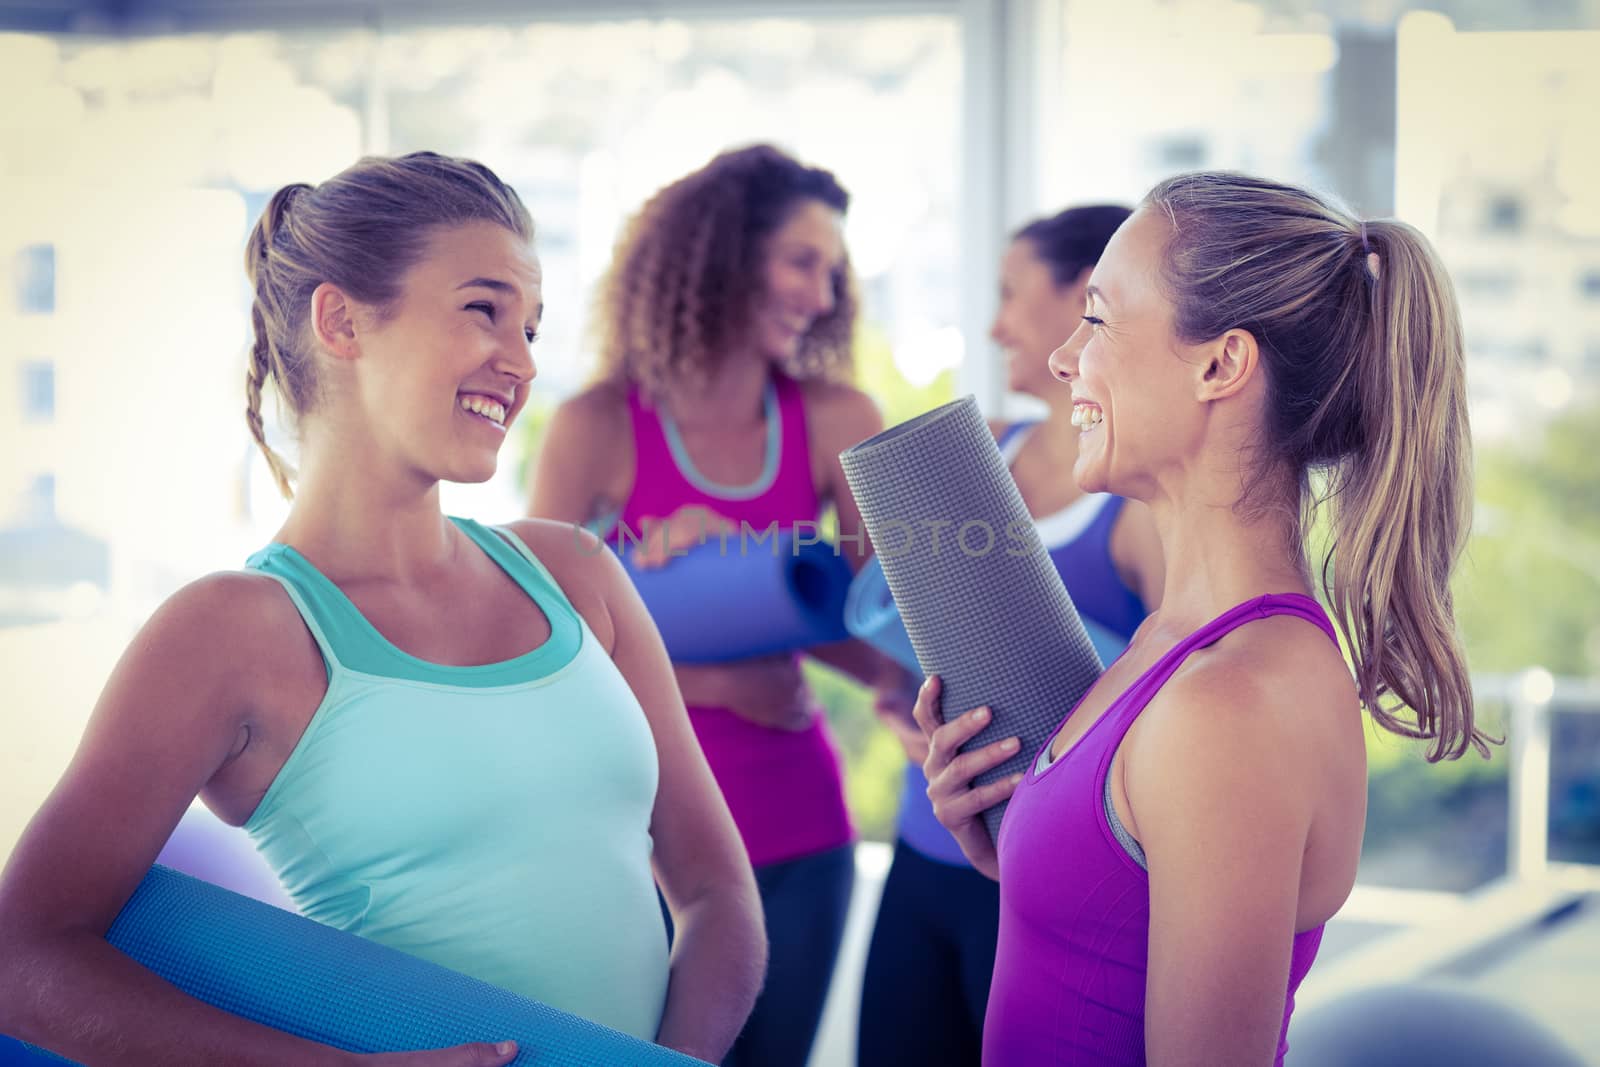 Attractive women looking at each other and smiling in fitness studio by Wavebreakmedia